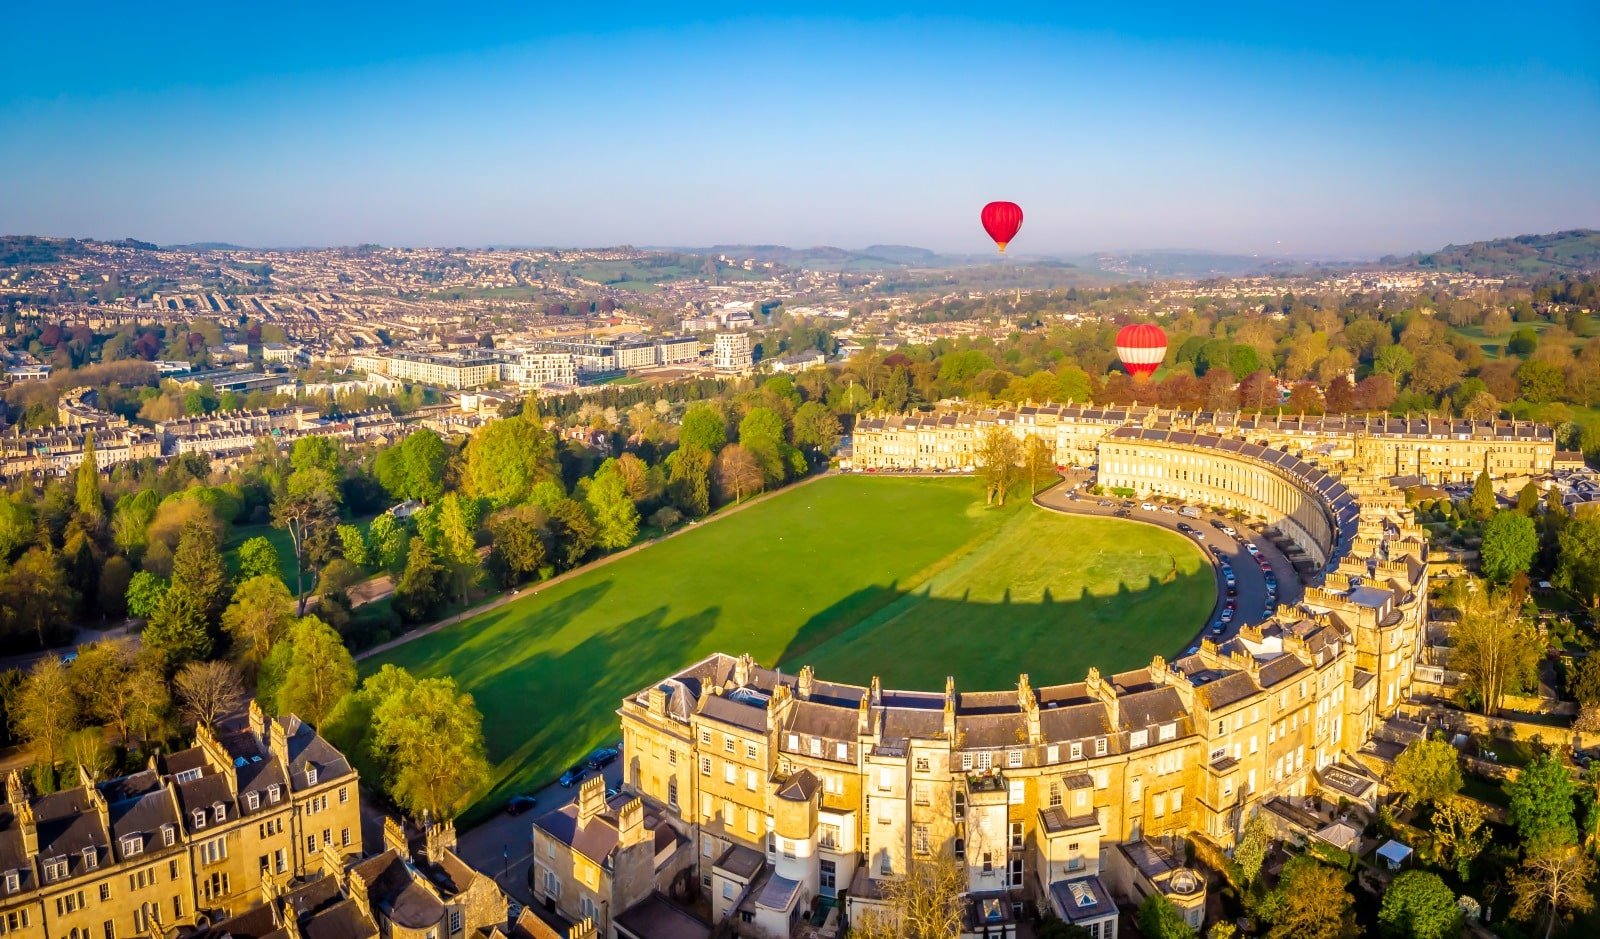 <p><span>Bath, known for its Roman heritage and Georgian architecture, offers a journey through different eras of English history. The Roman Baths complex, remarkably preserved, provides a window into ancient leisure and social practices.</span></p> <p><span>The Royal Crescent, a striking example of Georgian architecture, epitomizes the city’s 18th-century elegance. Bath has many historical landmarks and offers modern-day luxuries like thermal spas, boutique shopping, and a vibrant cultural scene, all while maintaining its historical charm.</span></p>